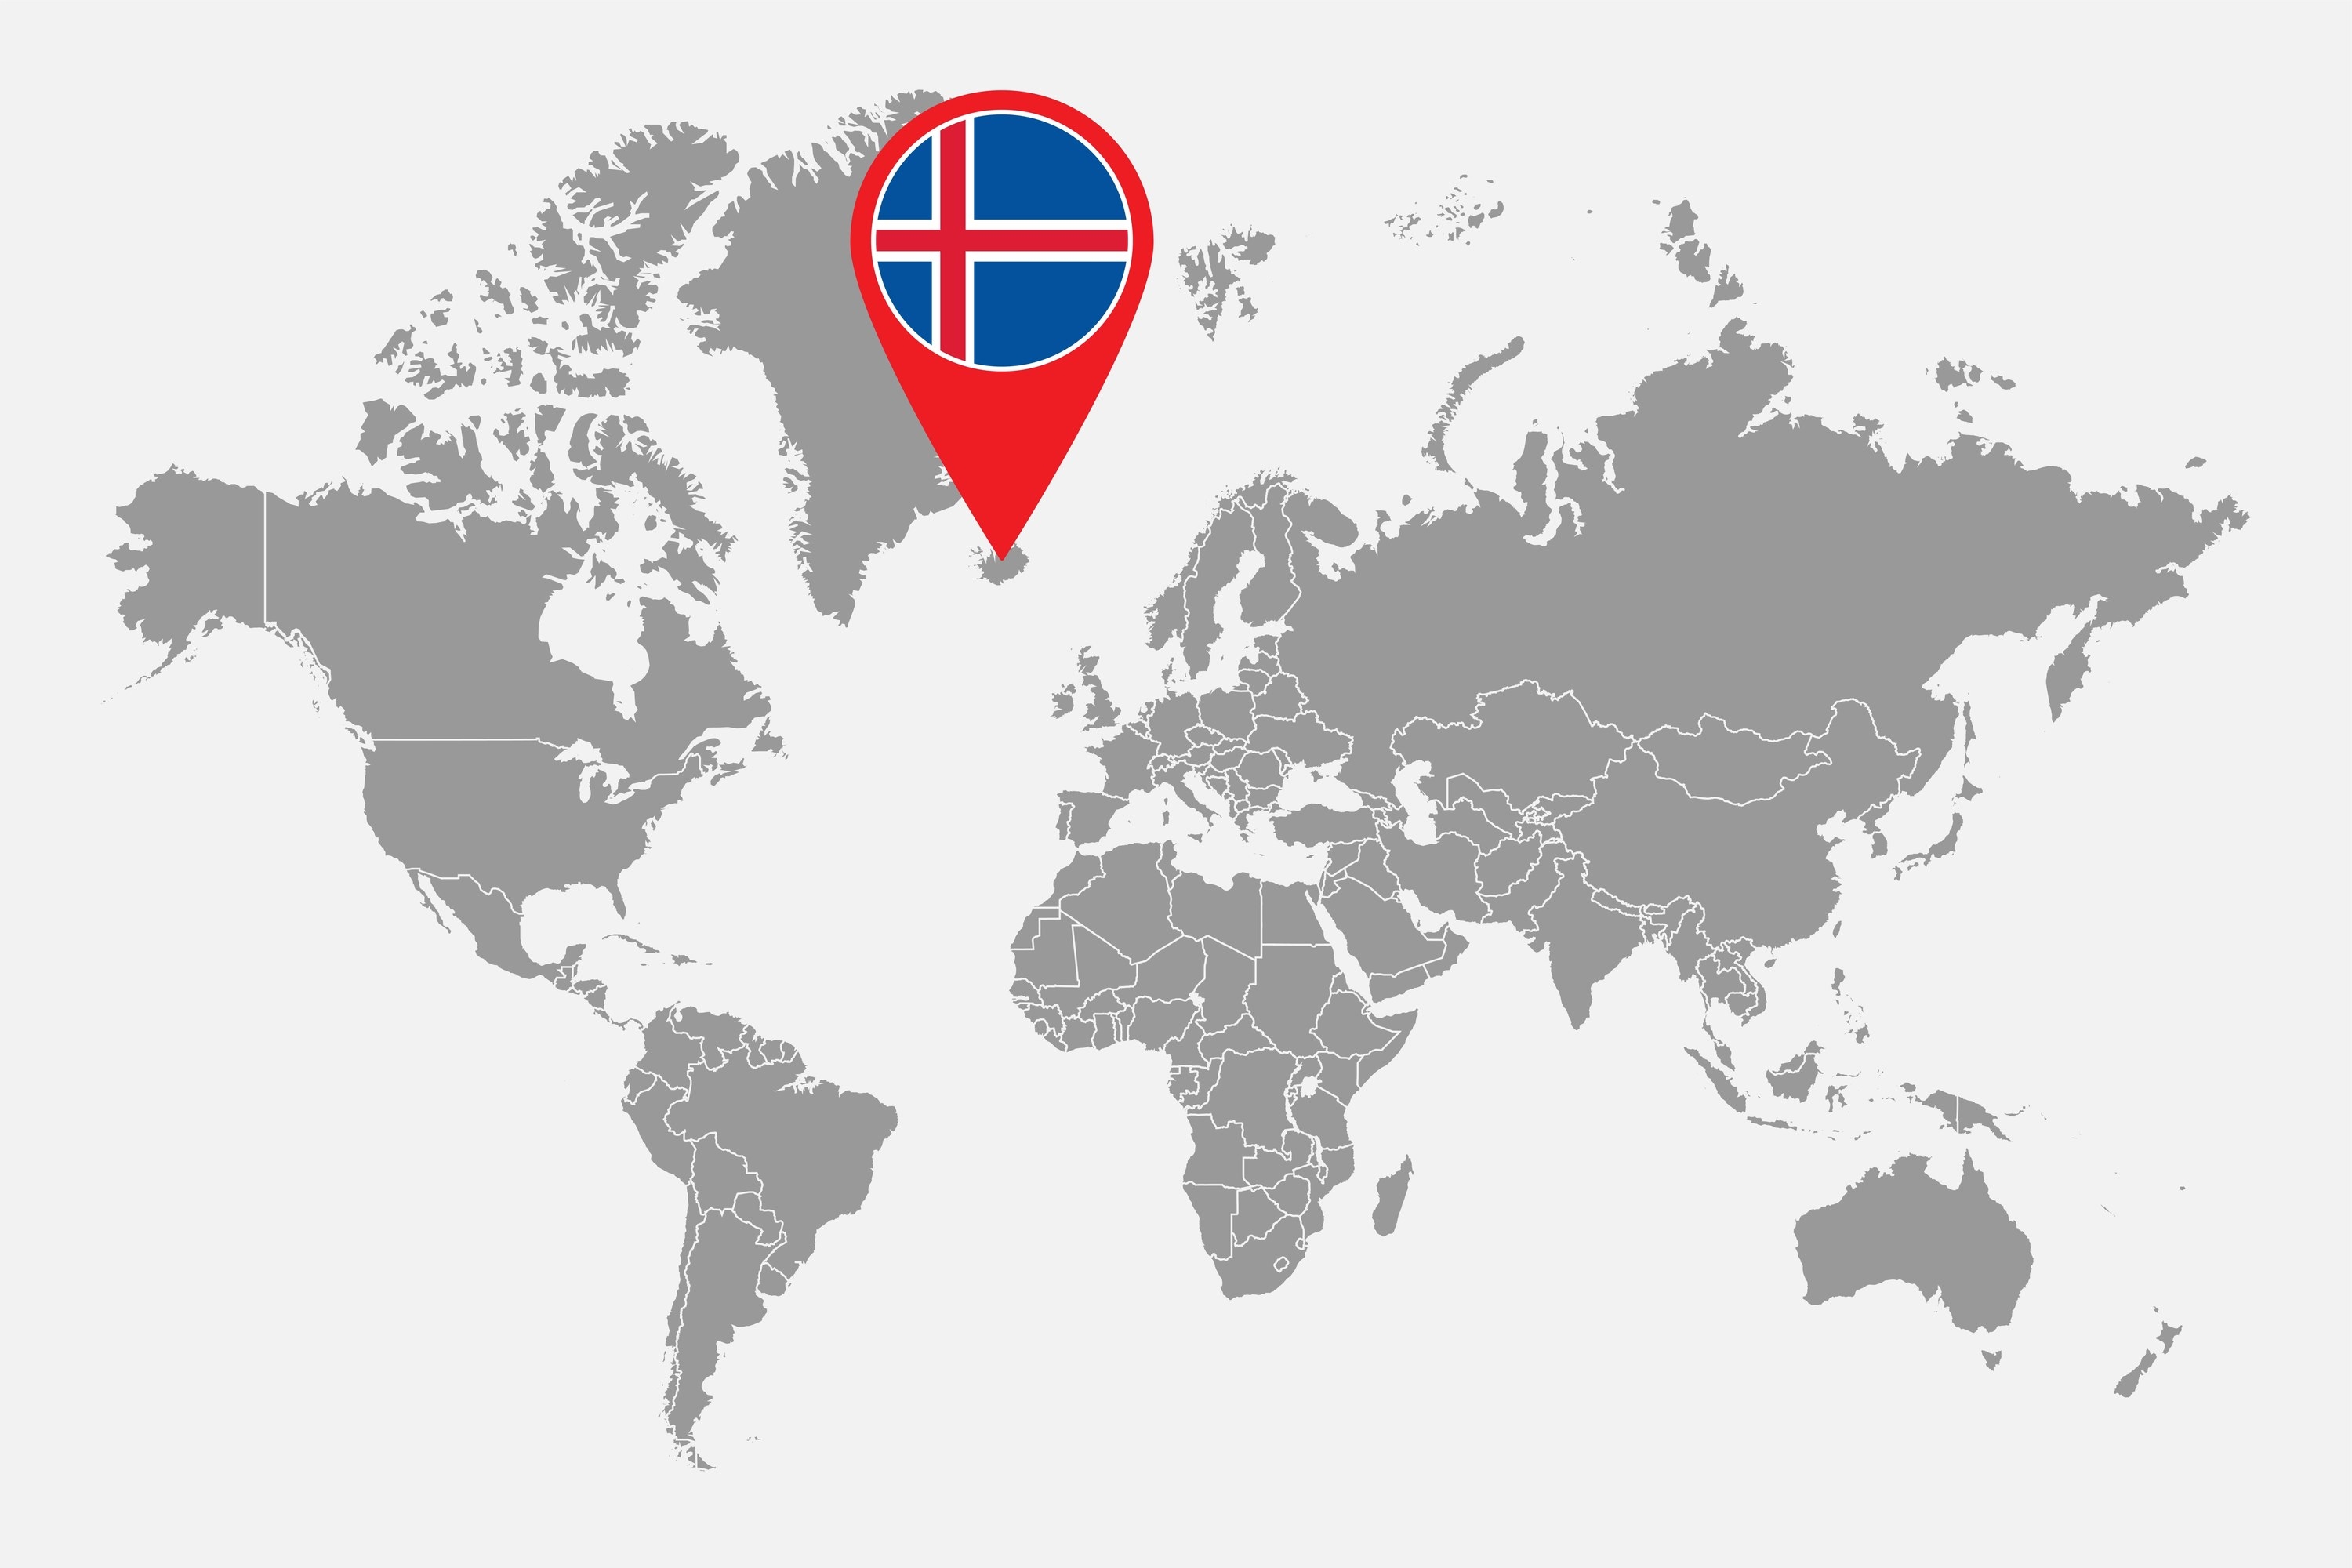 A world map with Iceland indicated